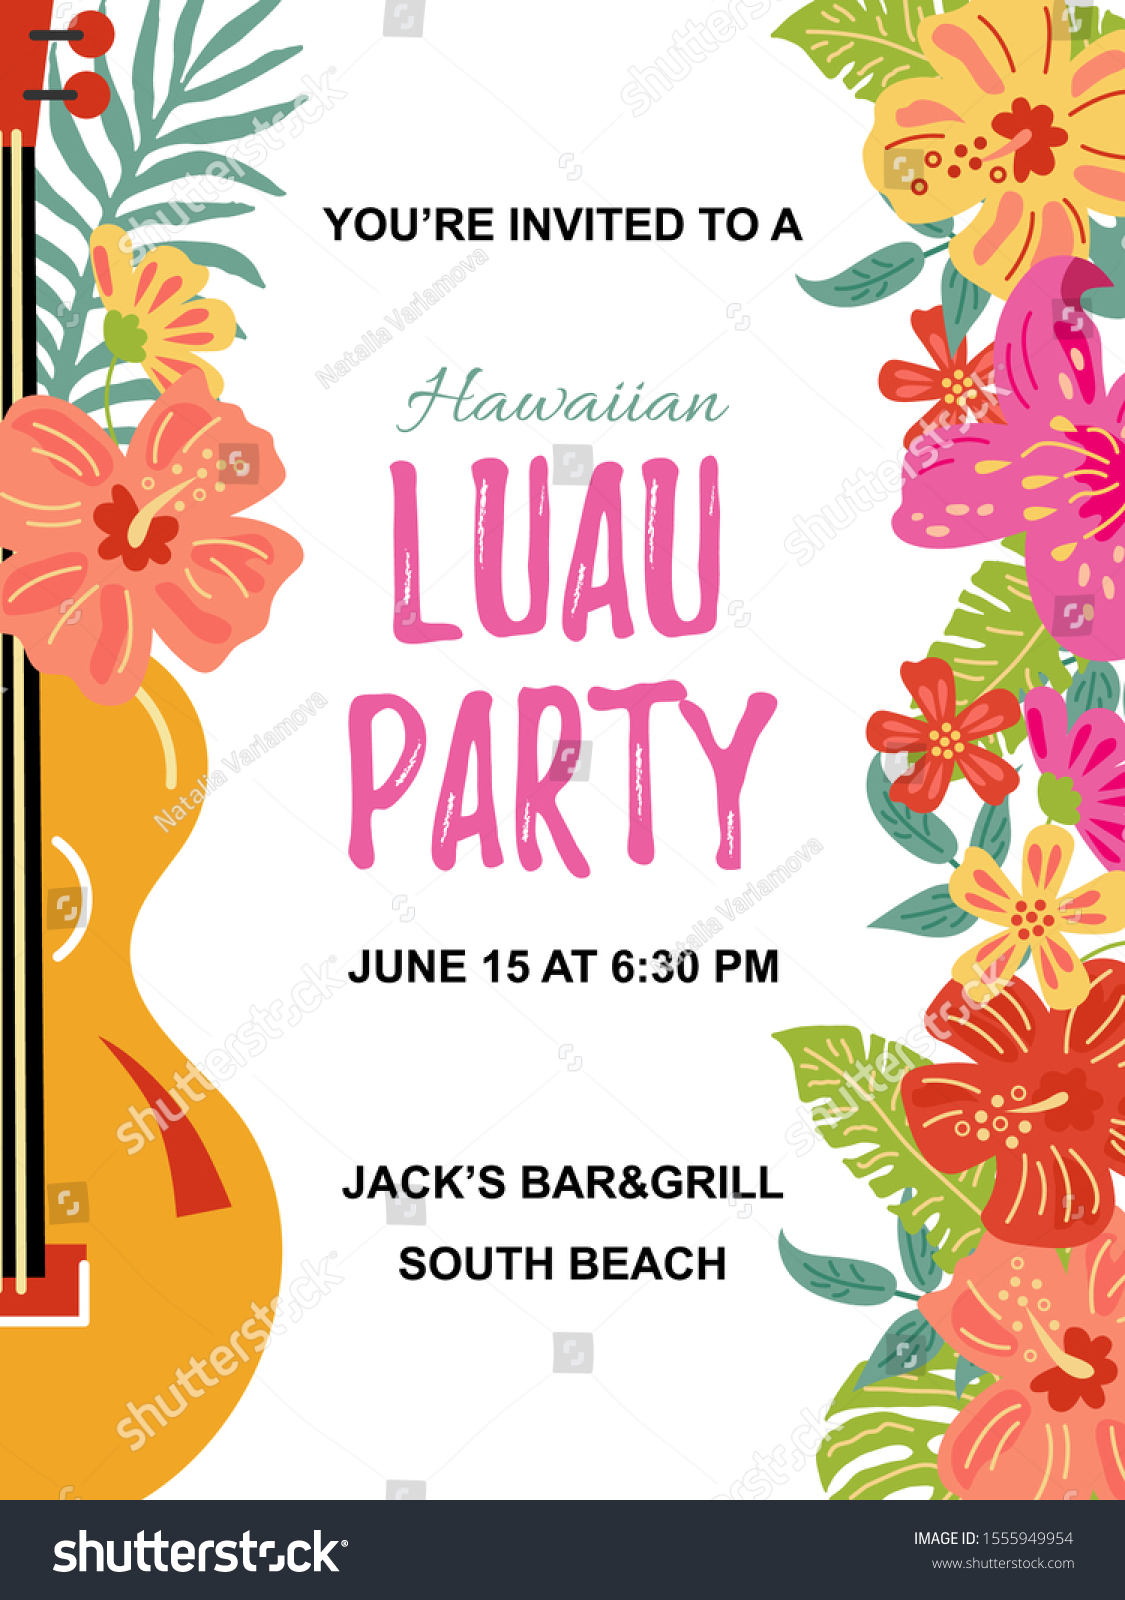 SVG of Guitar with jungle flowers, exotic leaves. Hawaiian Luau party invitation vector illustration. Hand drawn sketch style. Place for text. Template for vacation, poster, banner, flyer. Flat style design. svg